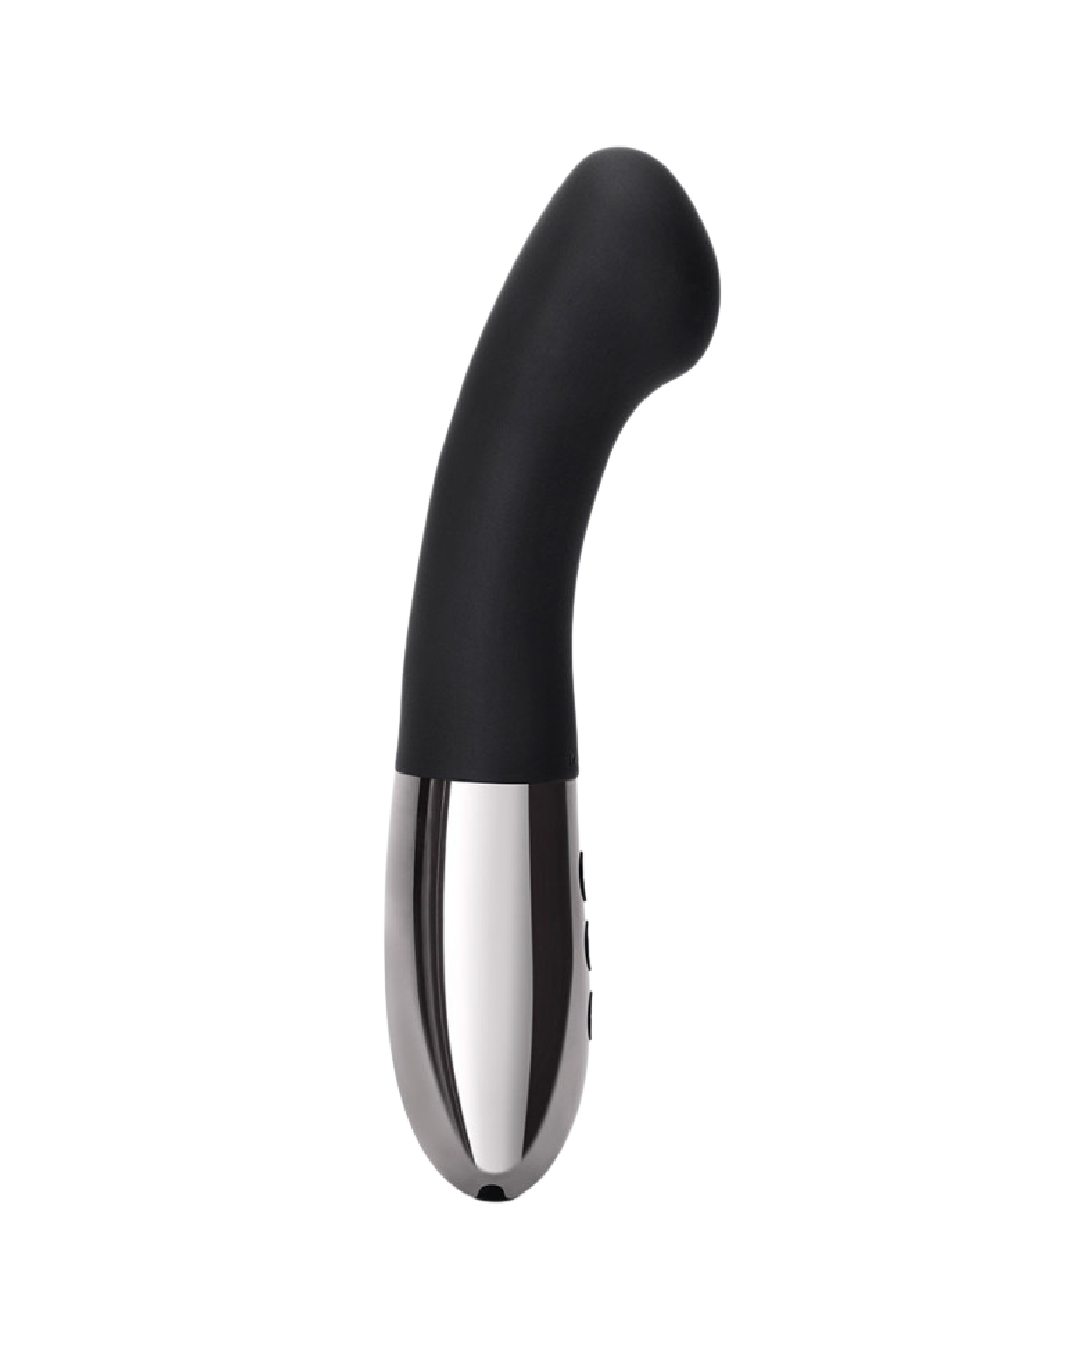 Le Wand Gee Powerful G-Spot Targeting Vibrator - Black